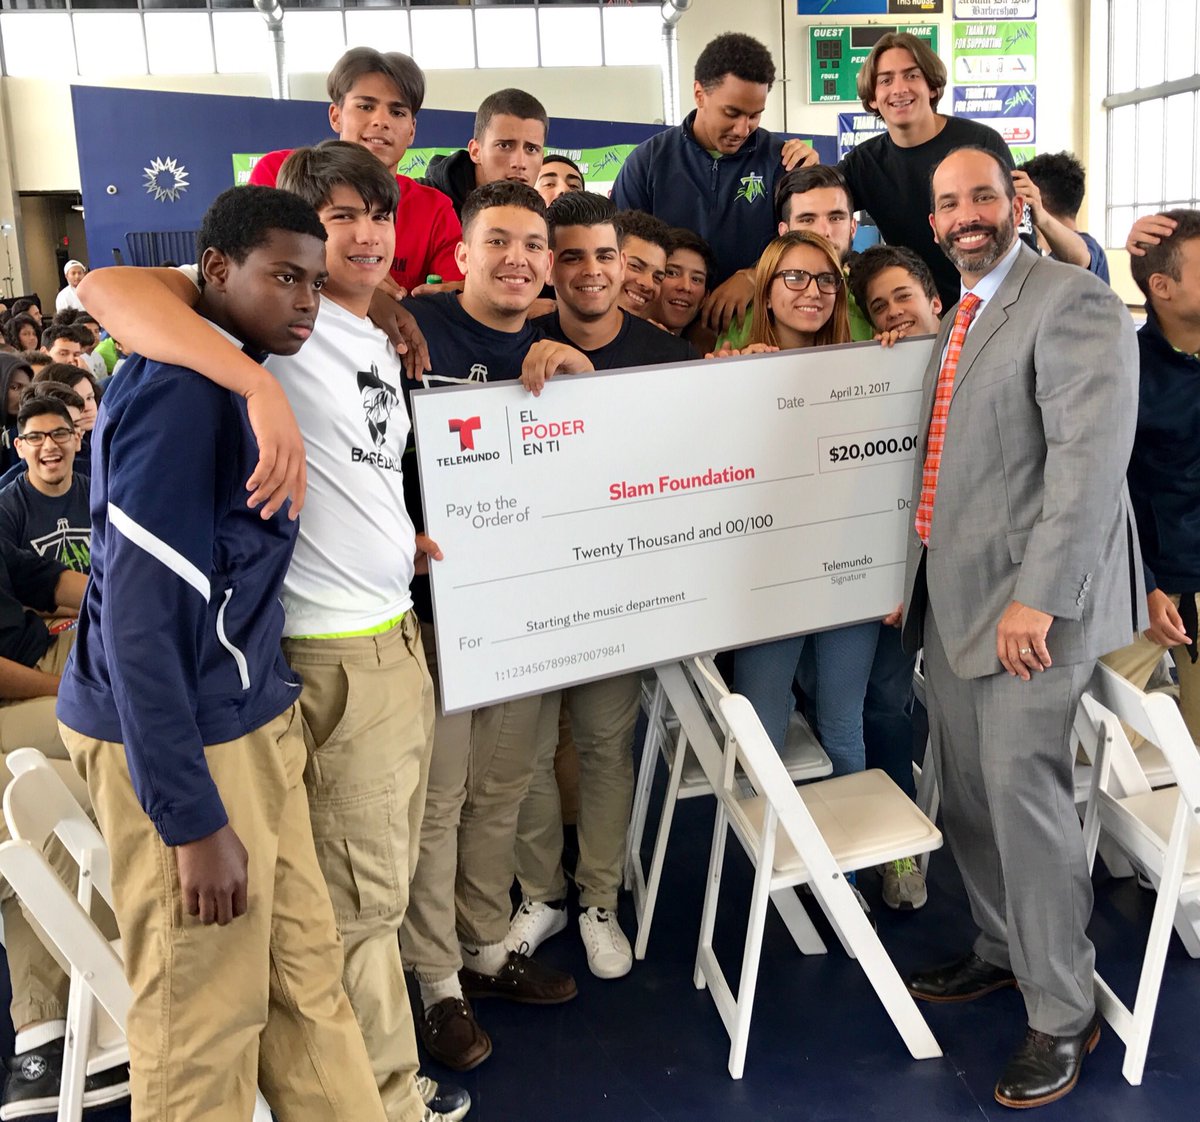 Thank you @telemundo for the support and donation to start up our @slammiaofficial music academy, Dale! #SLAMMiami https://t.co/cOmNvNNHlC